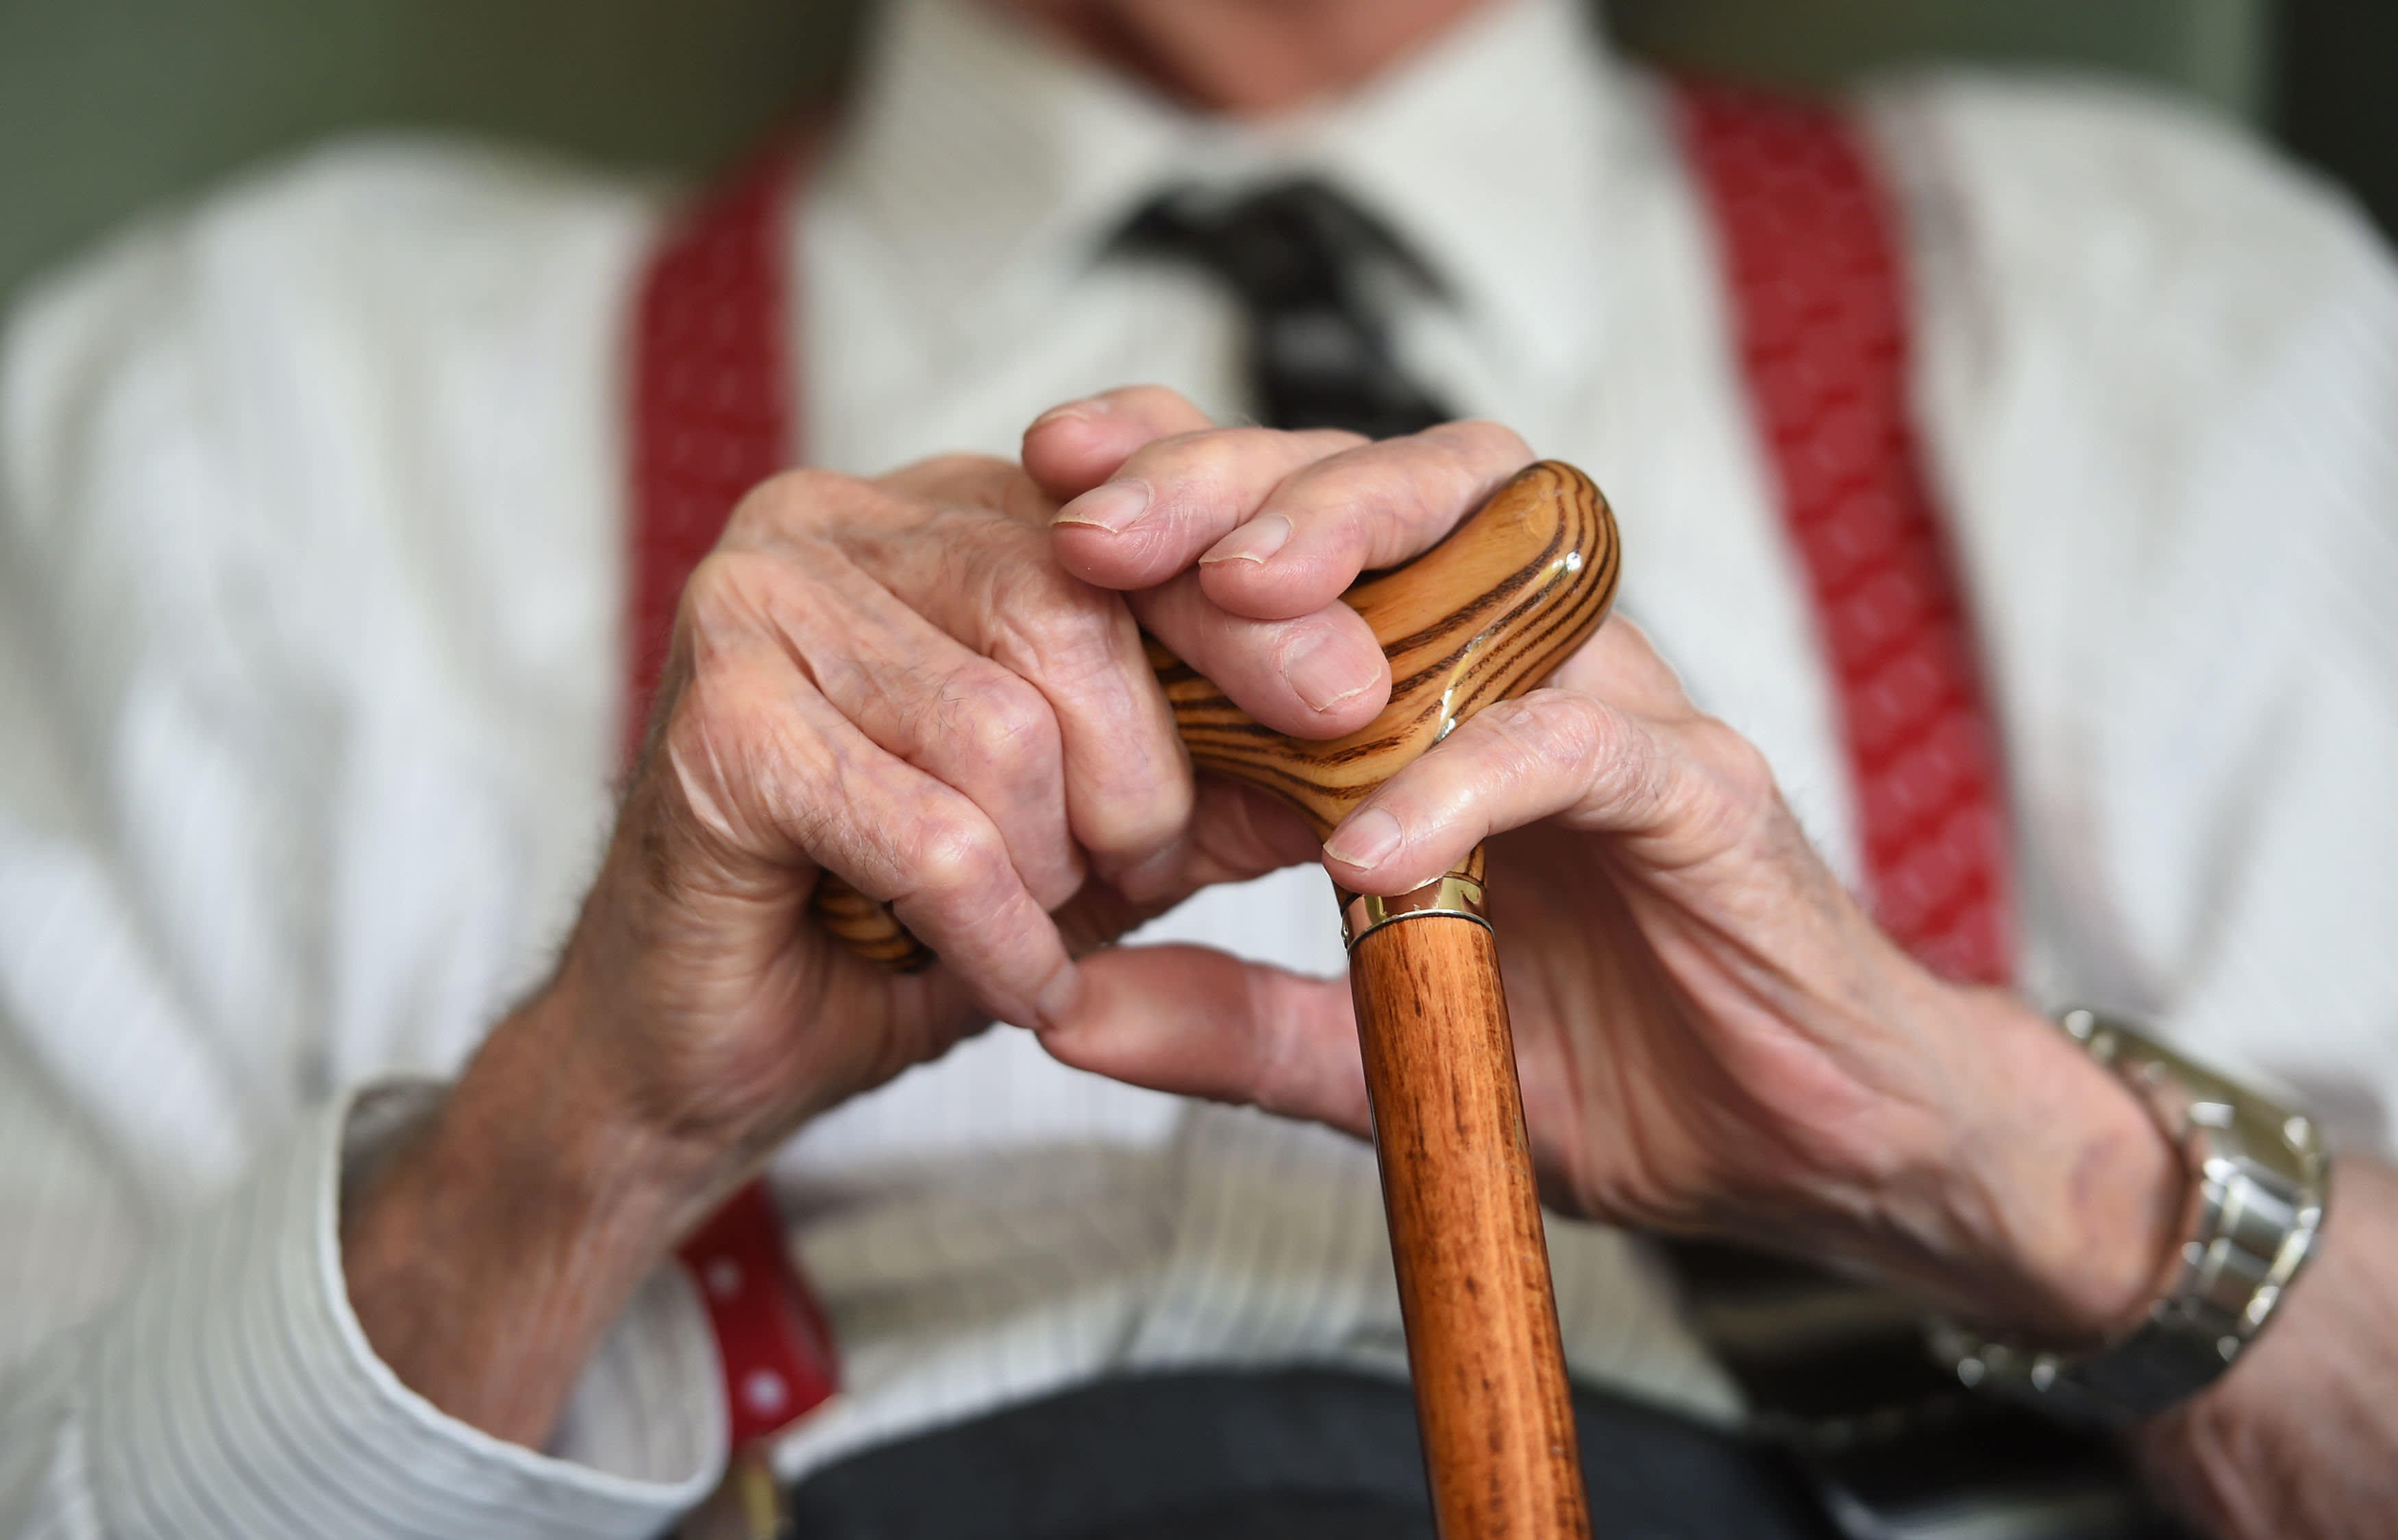 Social care reforms could see advice demand spike in 2022